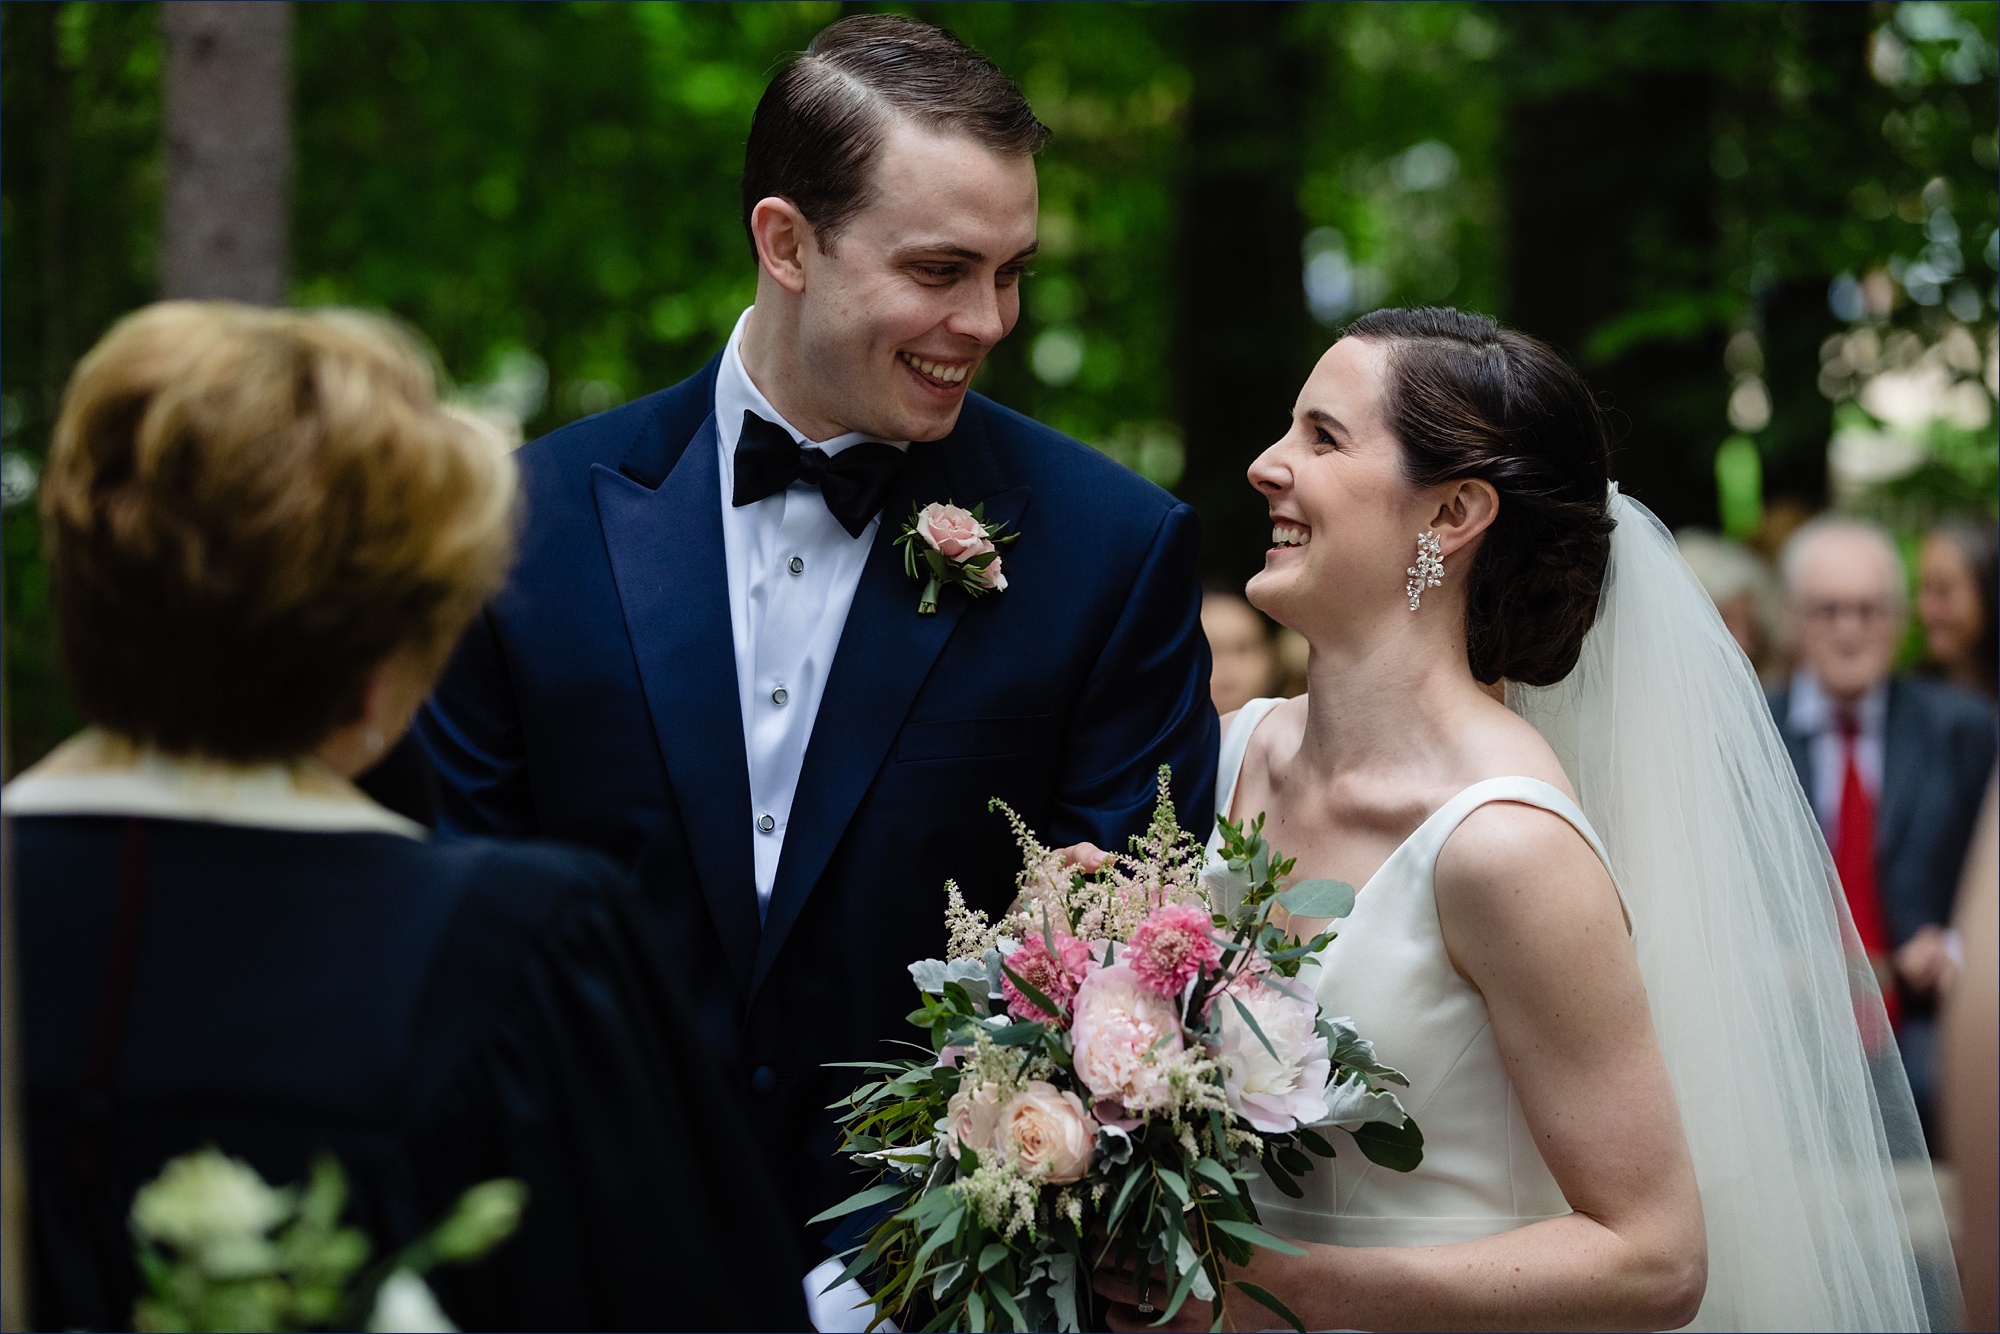 The bride and groom smile at one another at their wooded wedding ceremony in Maine